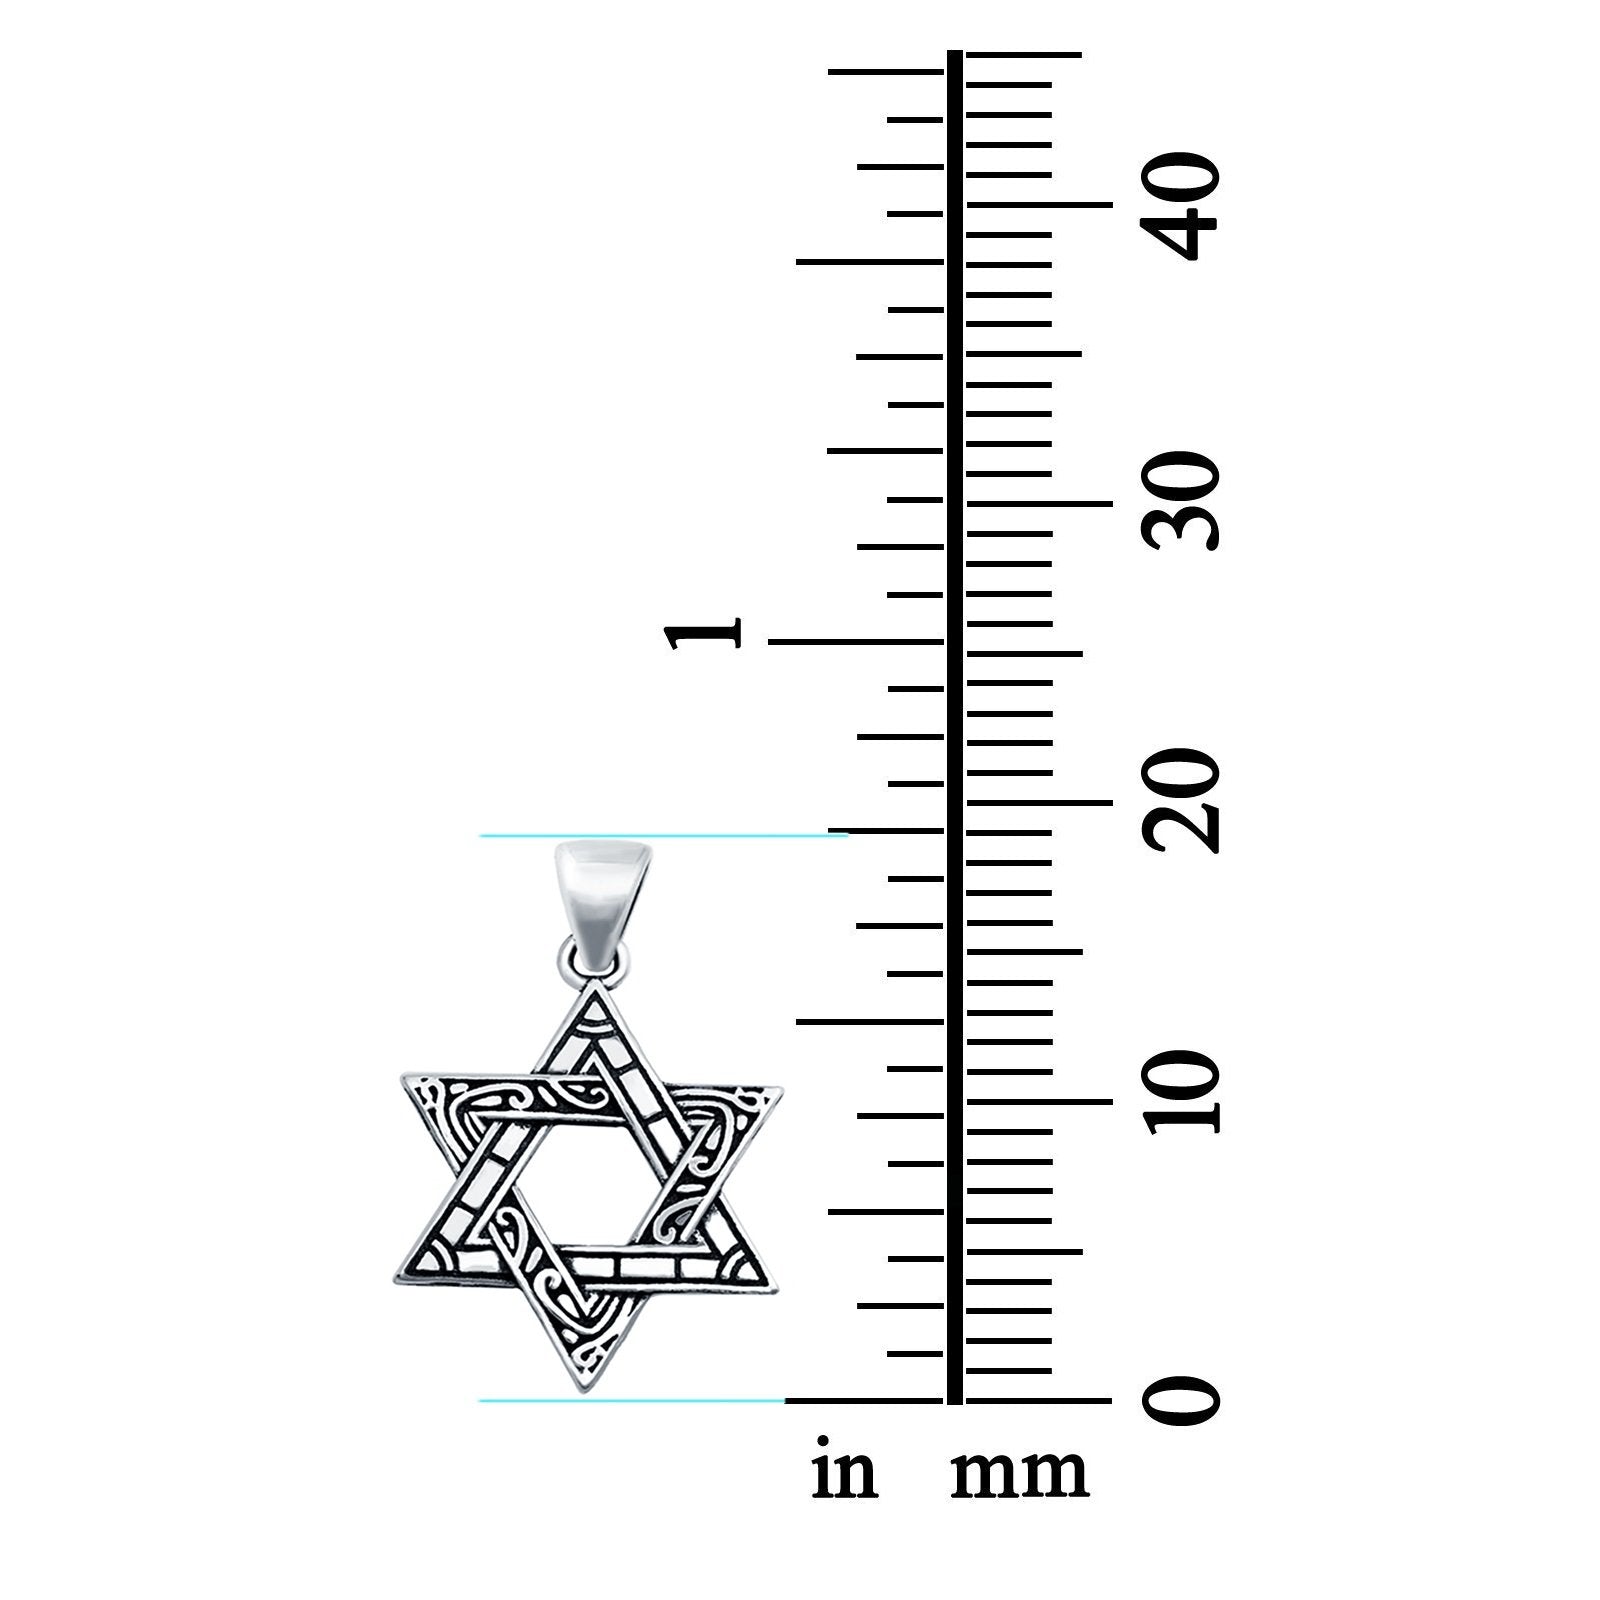 925 Sterling Silver Star of David Charm Pendant Fashion Jewelry